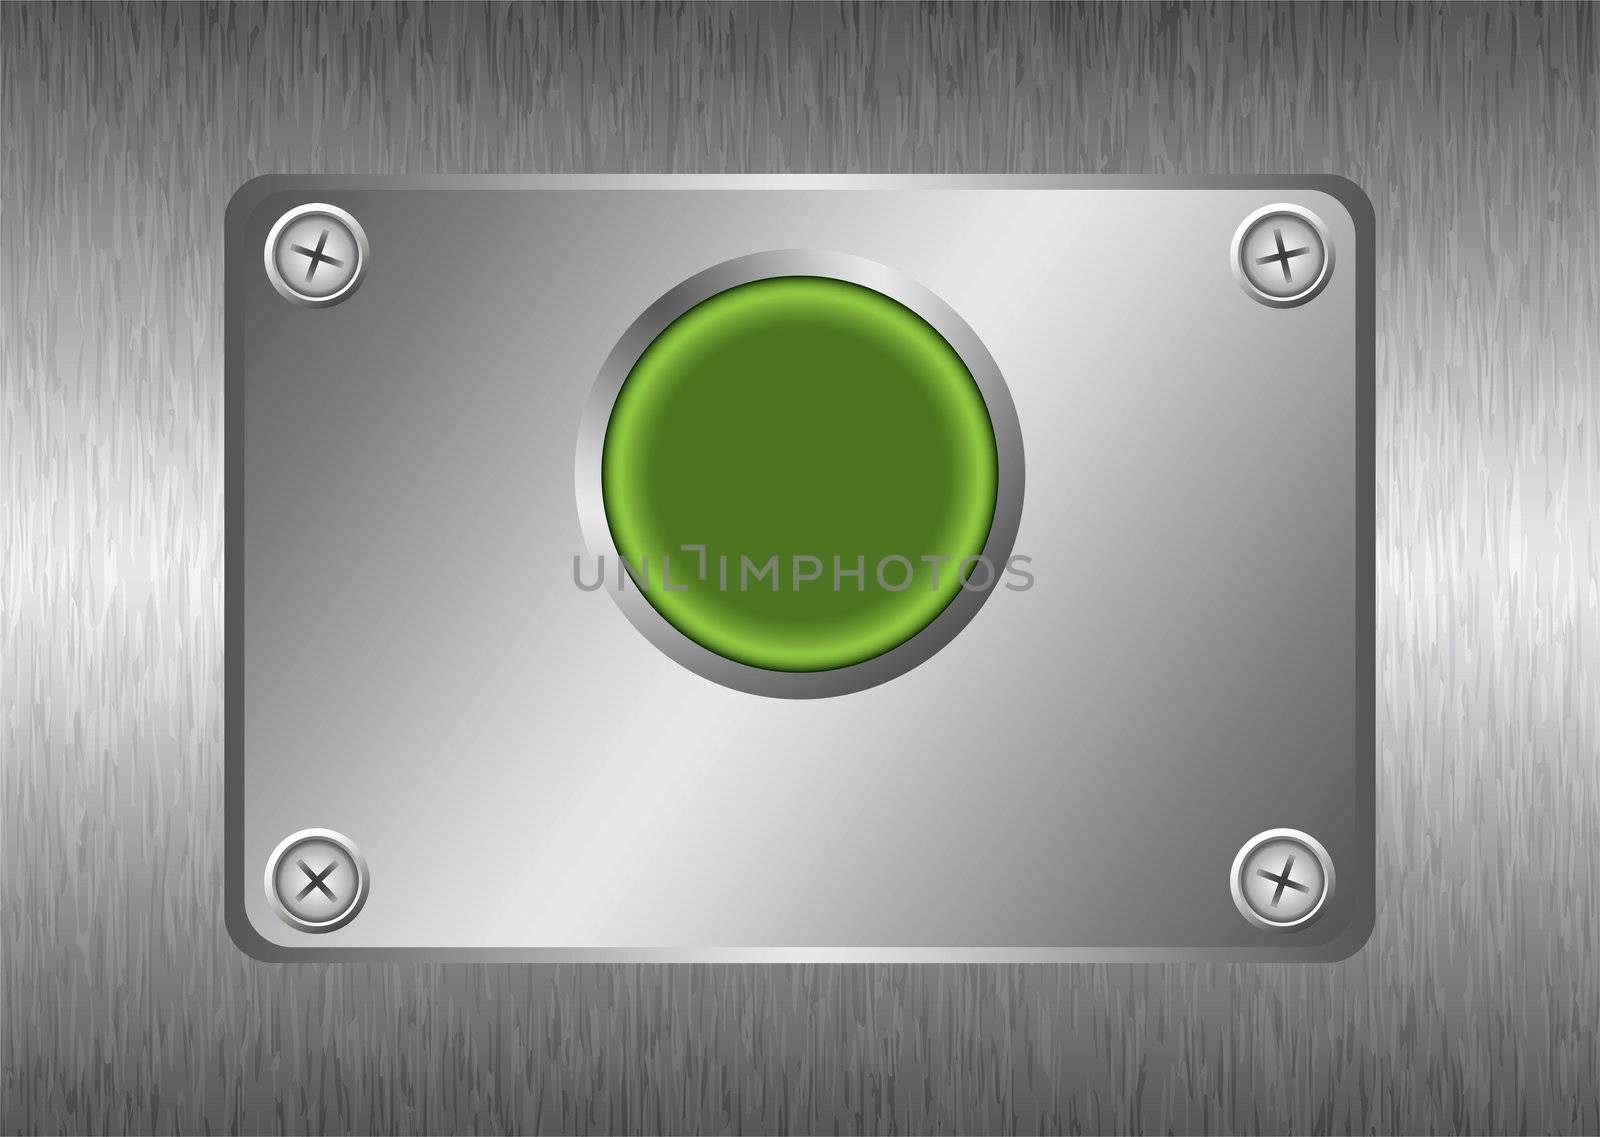 Silver metal background with green button and screw heads